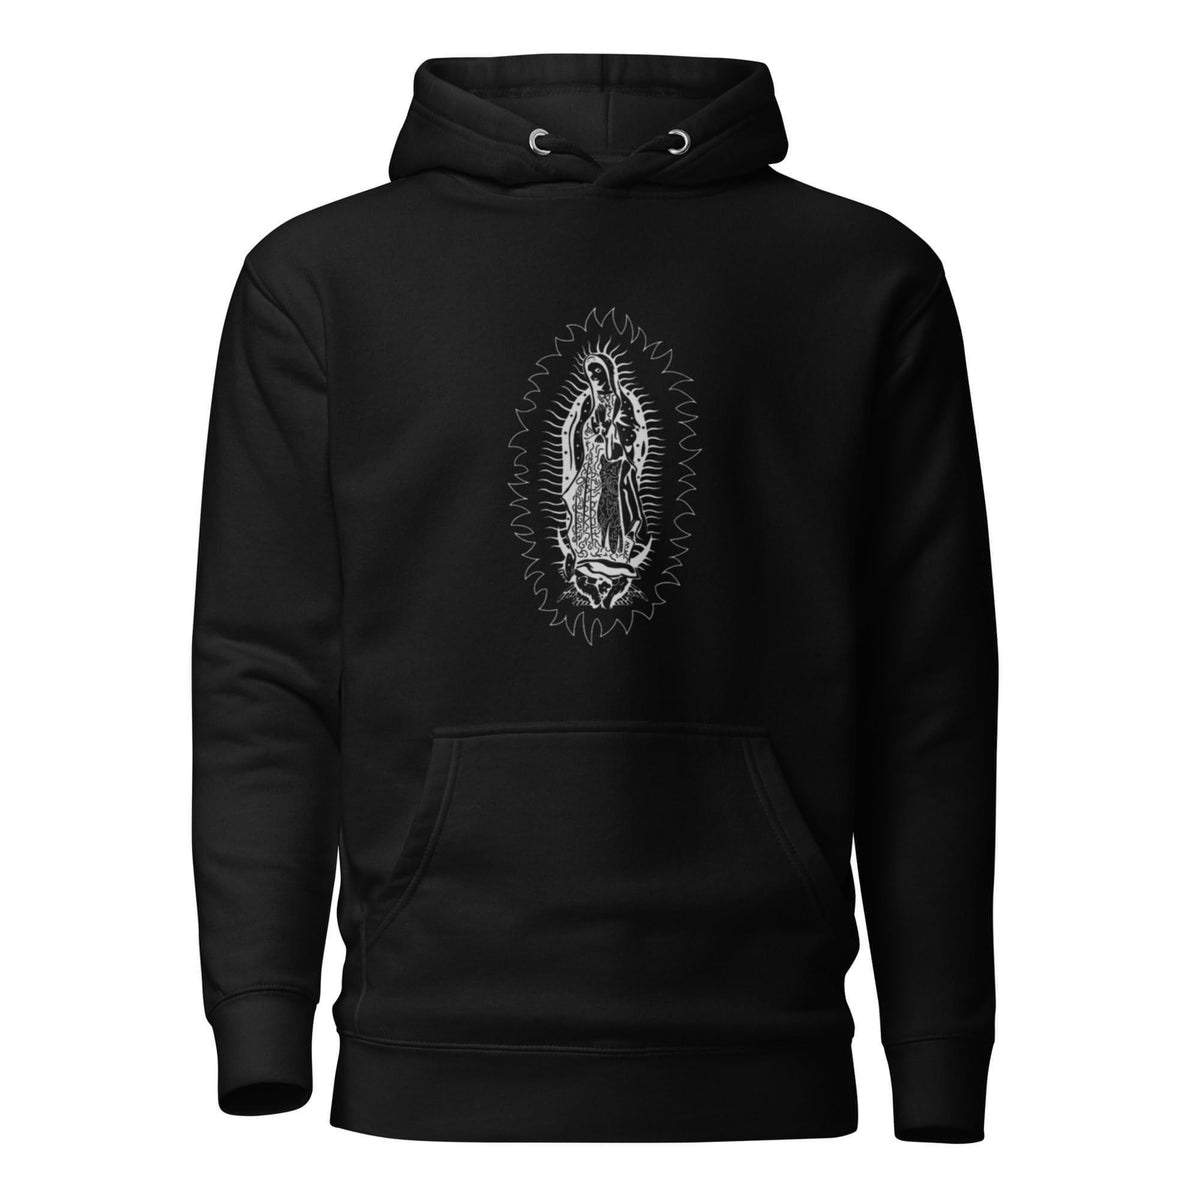 Our Lady Hoodie